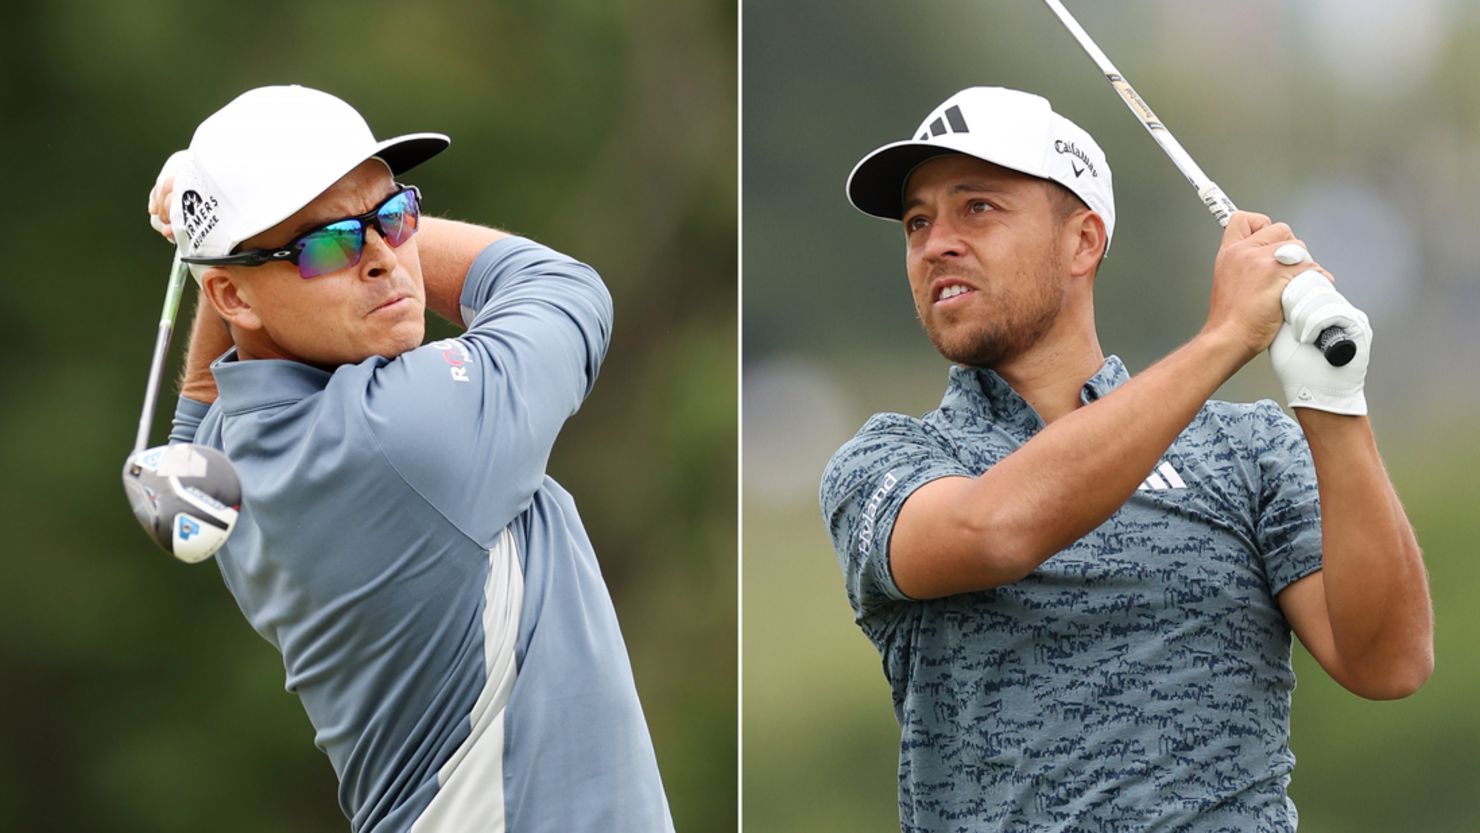 Rickie Fowler, left, and Xander Schauffele, right, in action during the opening round of the 123rd US Open.